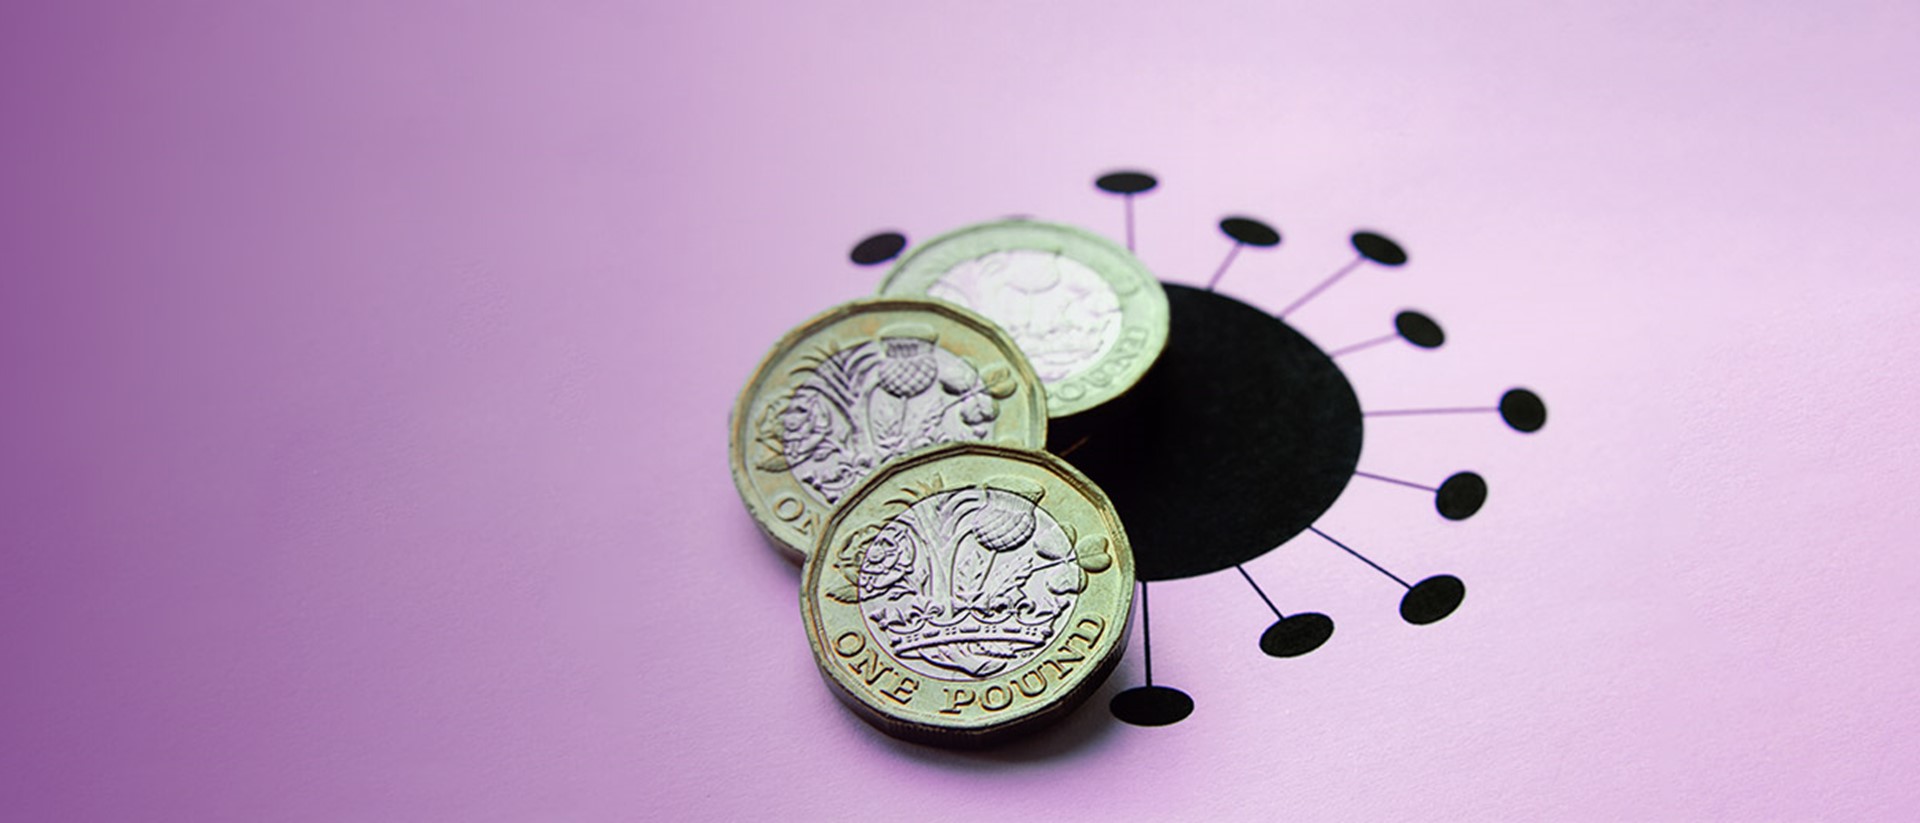 Image of pound coins on top of a black virus logo on a purple background